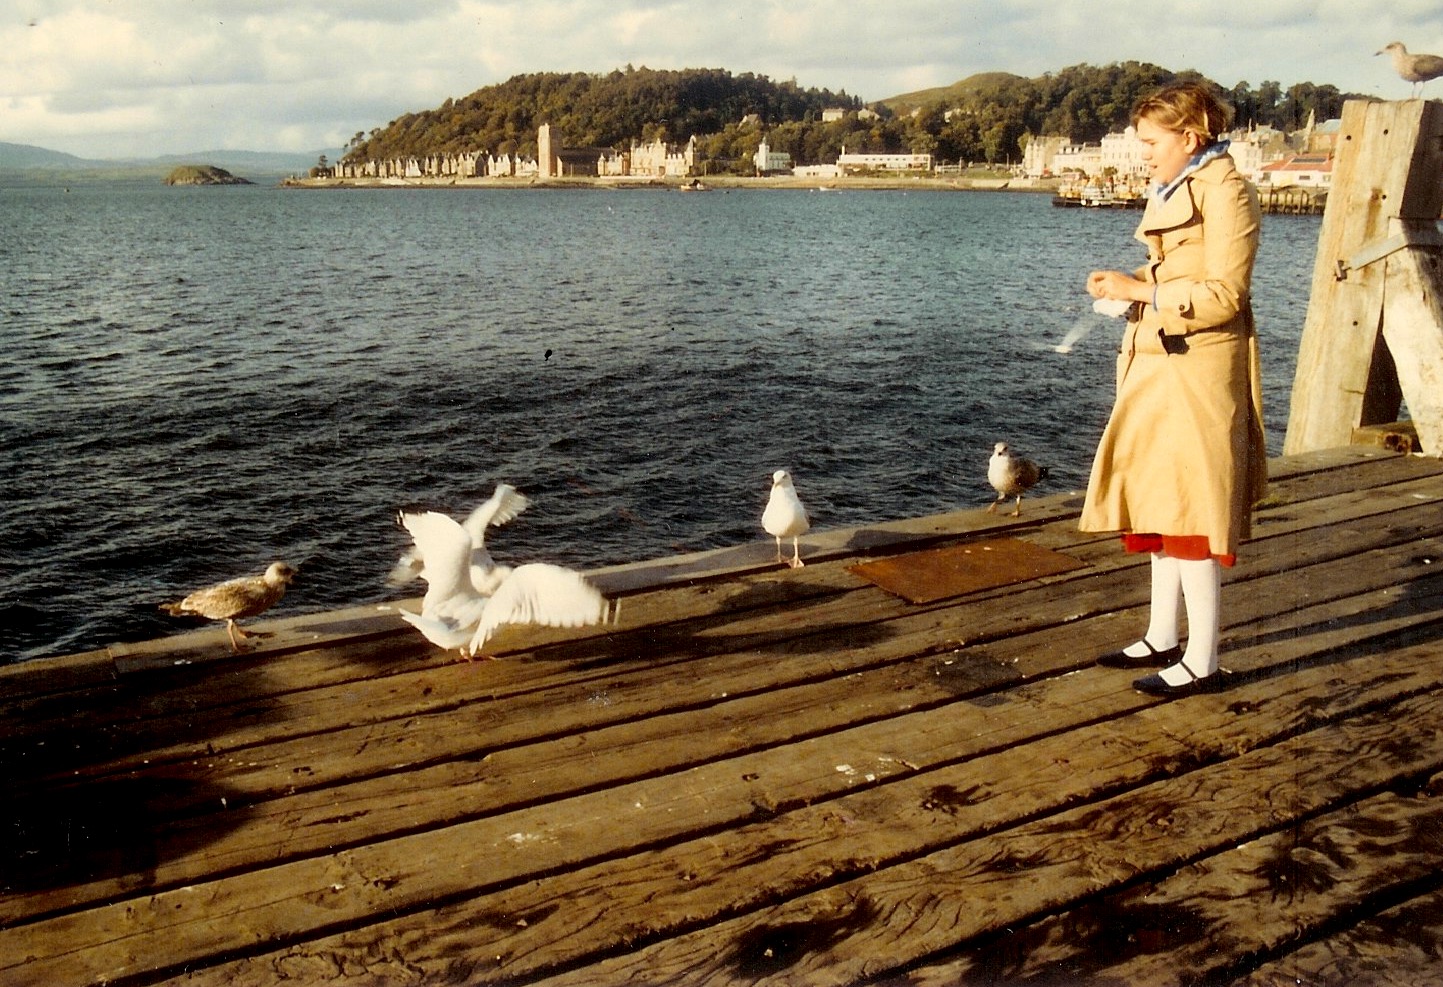 Back in 1984, we started our honeymoon in Edinburgh, and got as far as Oban, on the west coast of Scotland. Oban is on the Firth of Lorn, and Beth had fun feeding the gulls. 